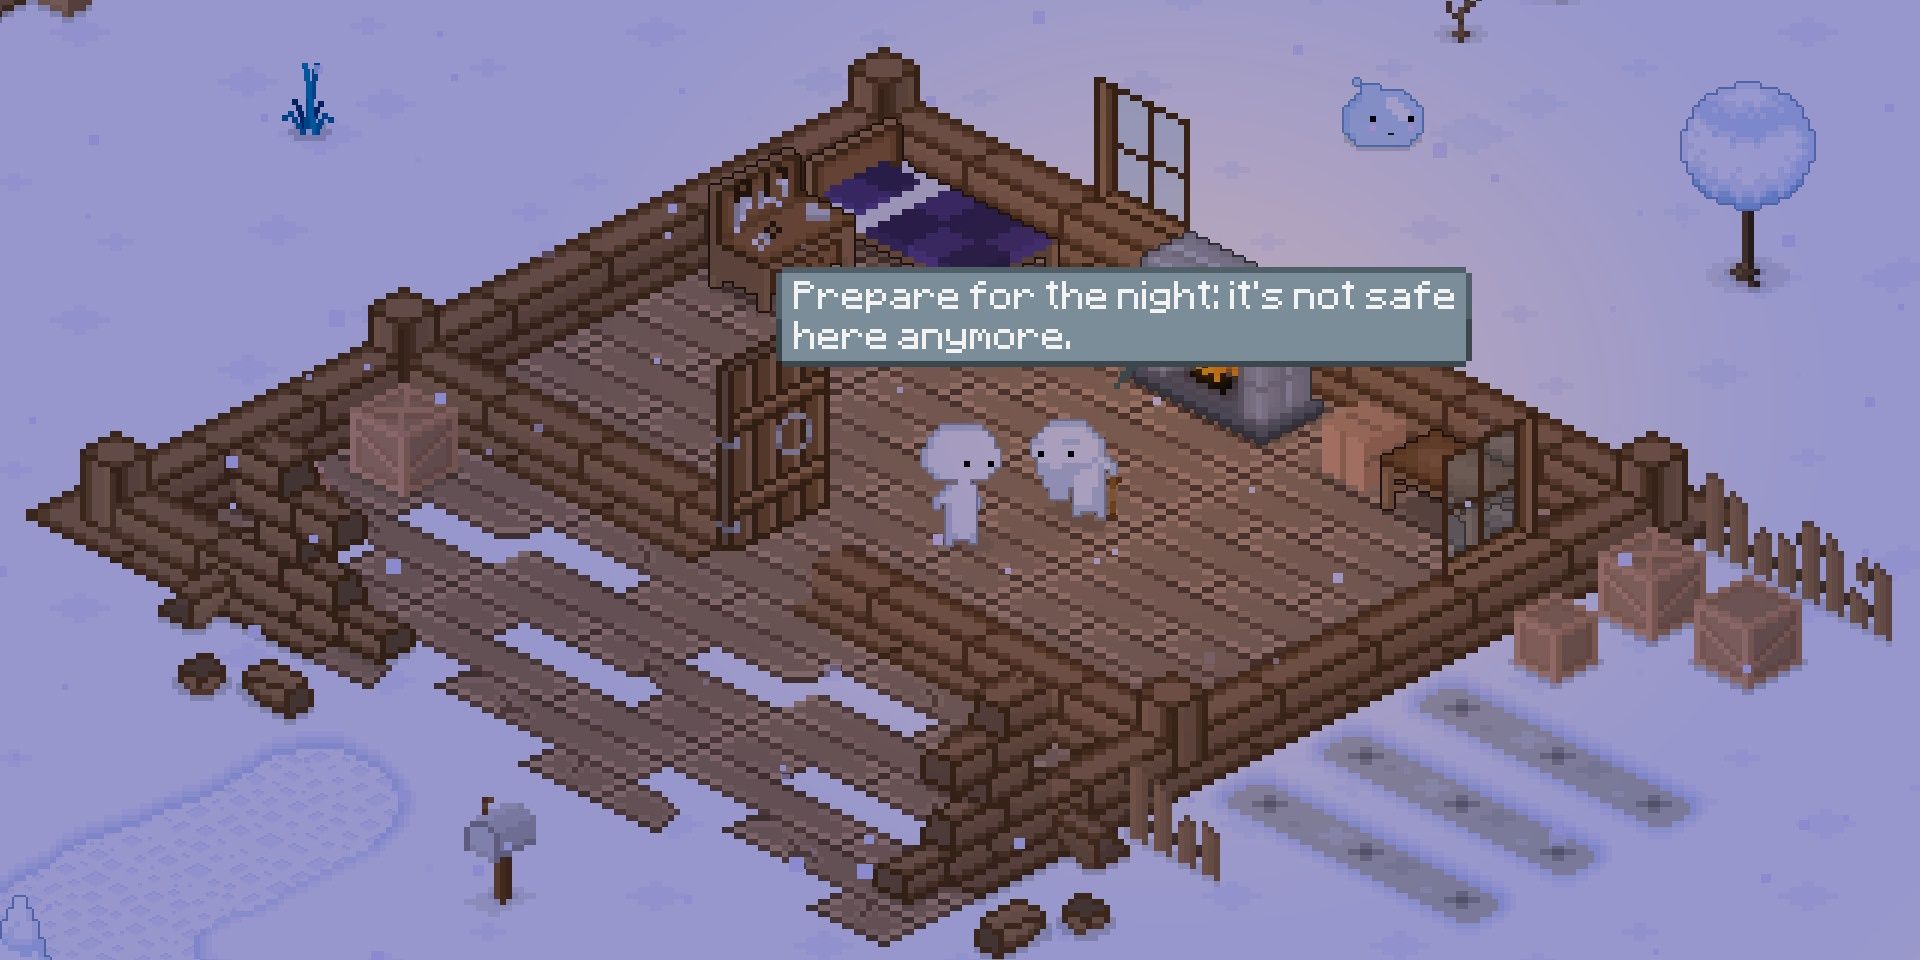 An old Snowman warning the player to prepare for the night as it's dangerous in Feel The Snow